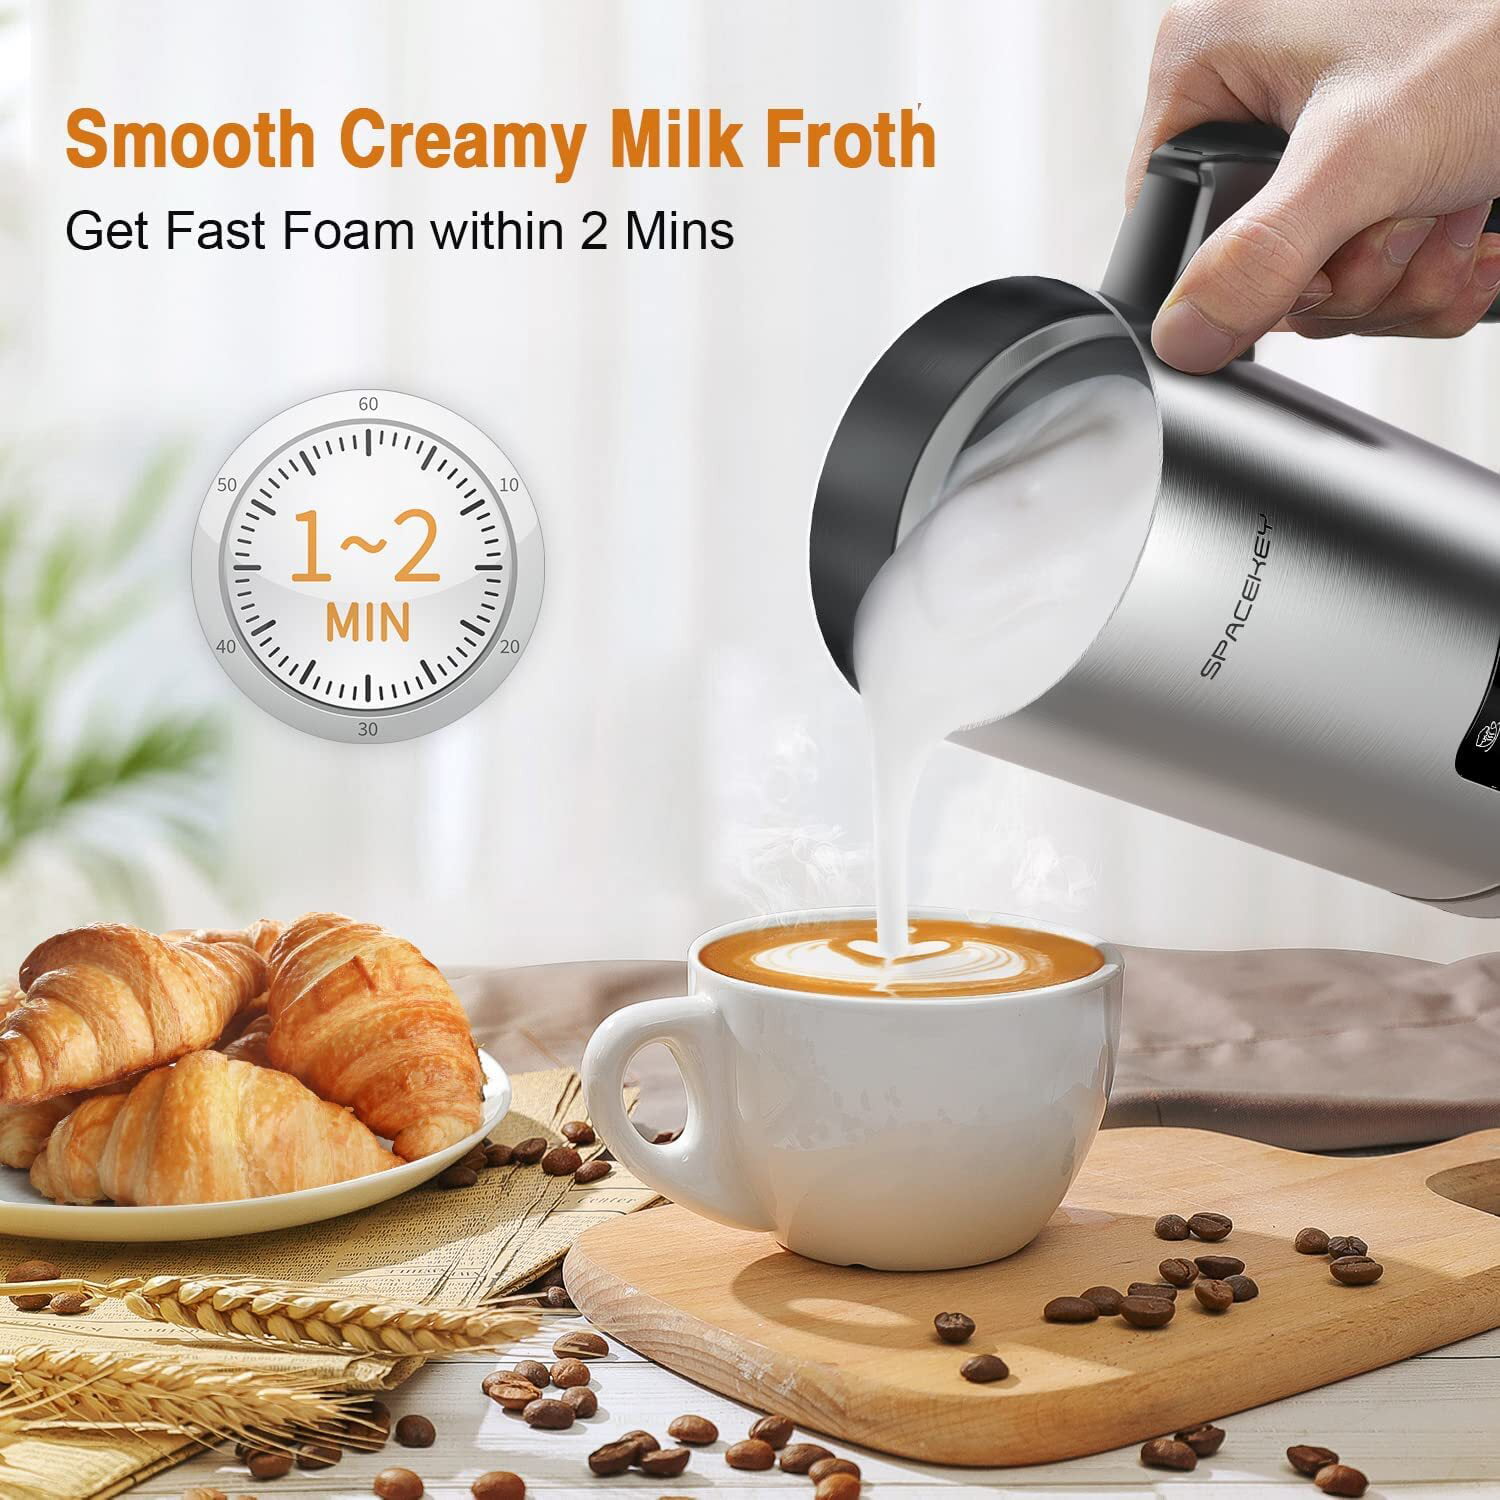 RATRSO Milk Frother Electric Milk Steamer Soft Foam Maker with Two Whisks for Frothing and Heating Milk 4 in 1 Multifunction for Hot & Cold Froth